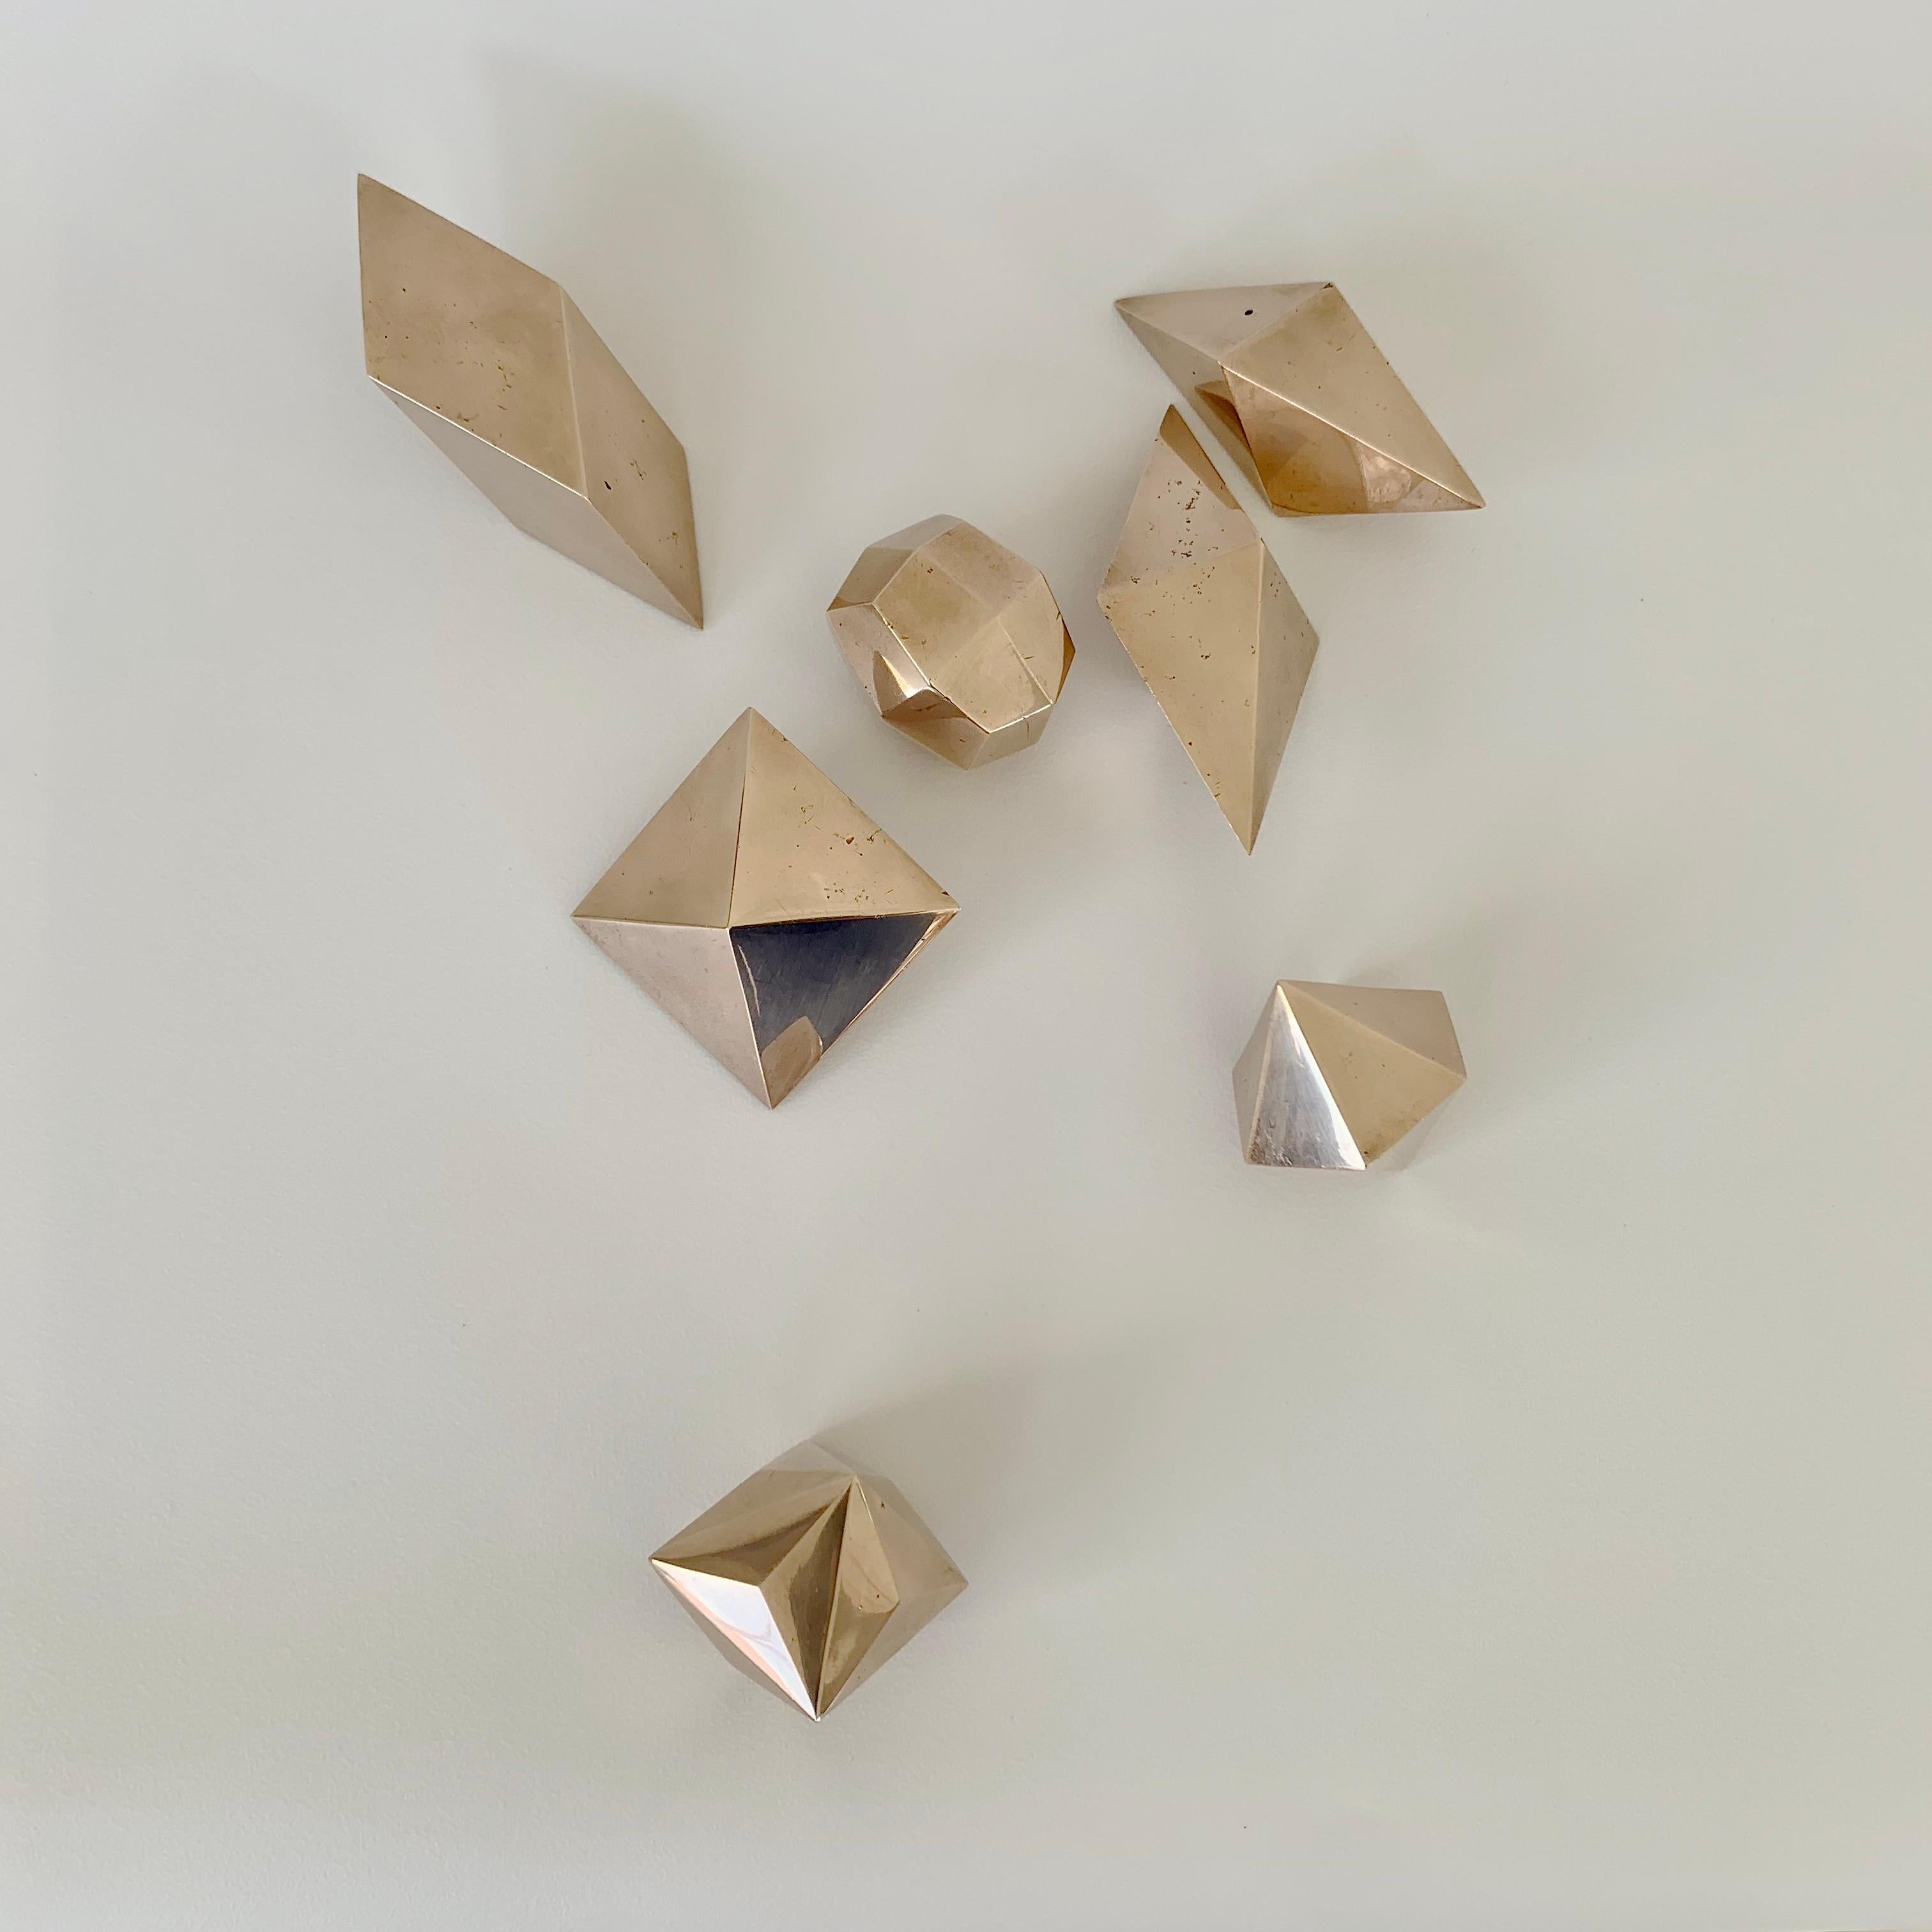 Polished Gold Bronze Decorative Geometrical Forms, circa 1960, France. For Sale